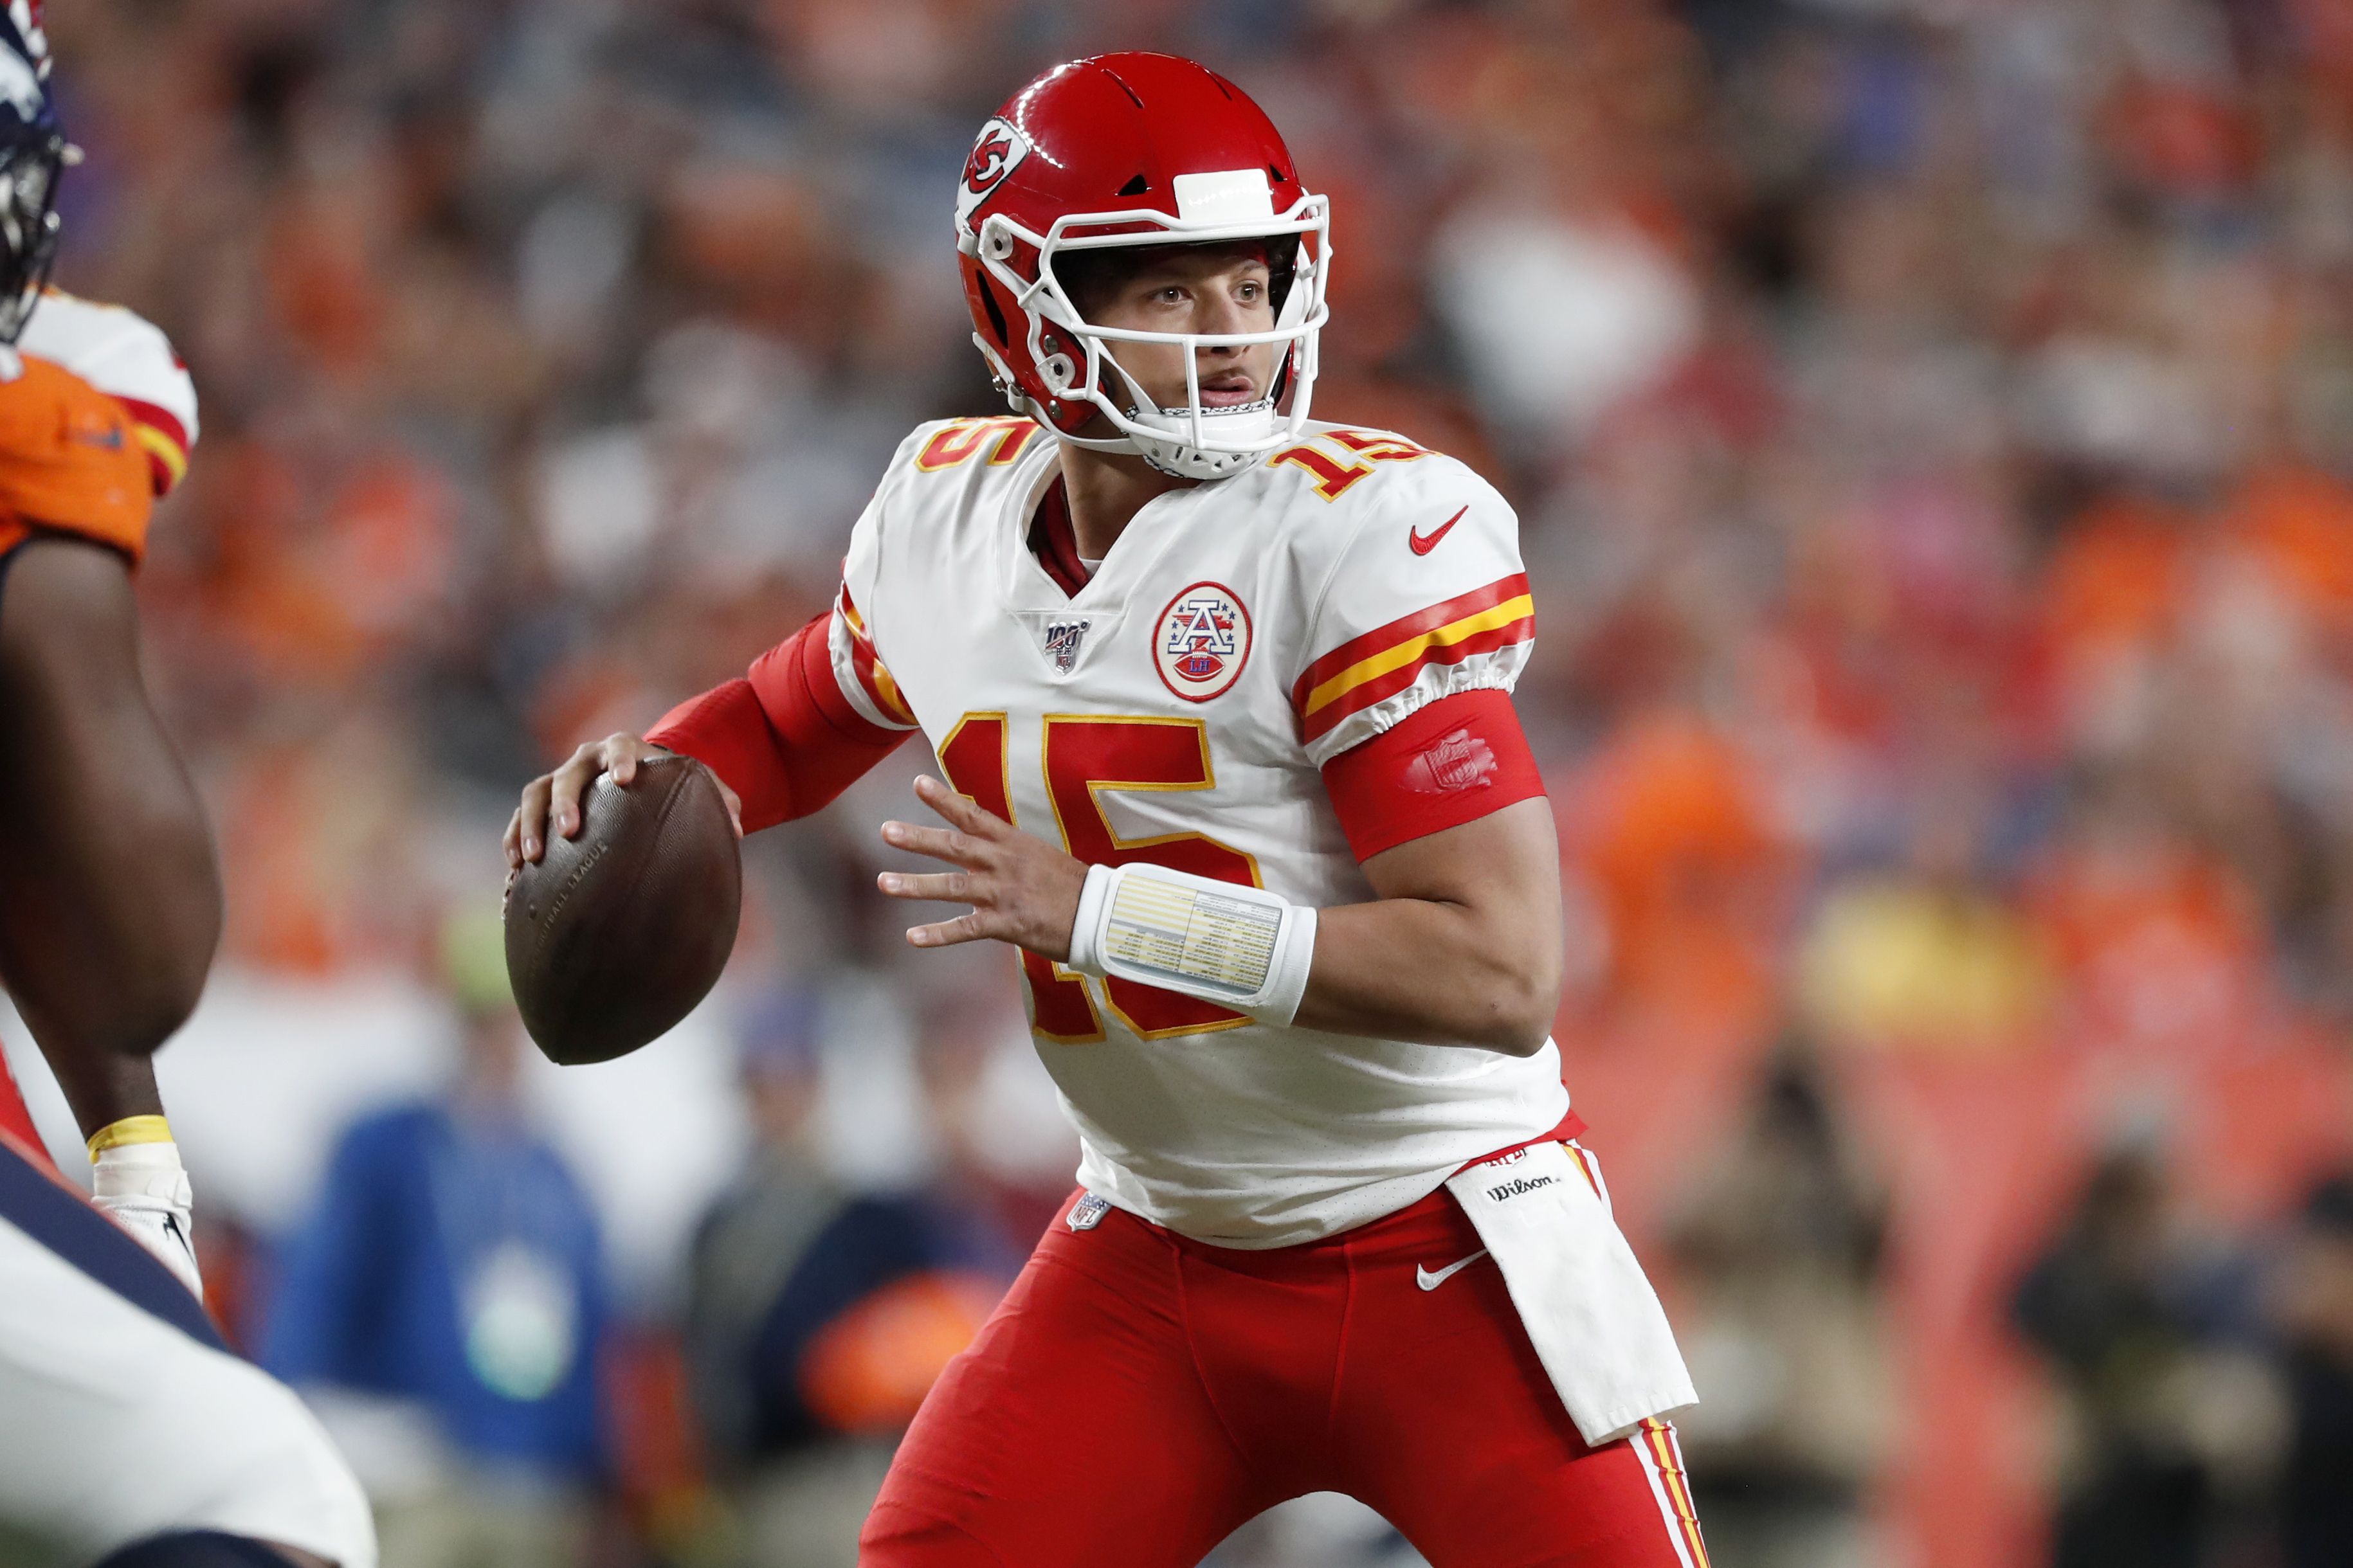 Chiefs' Mahomes throwing during practice after knee injury